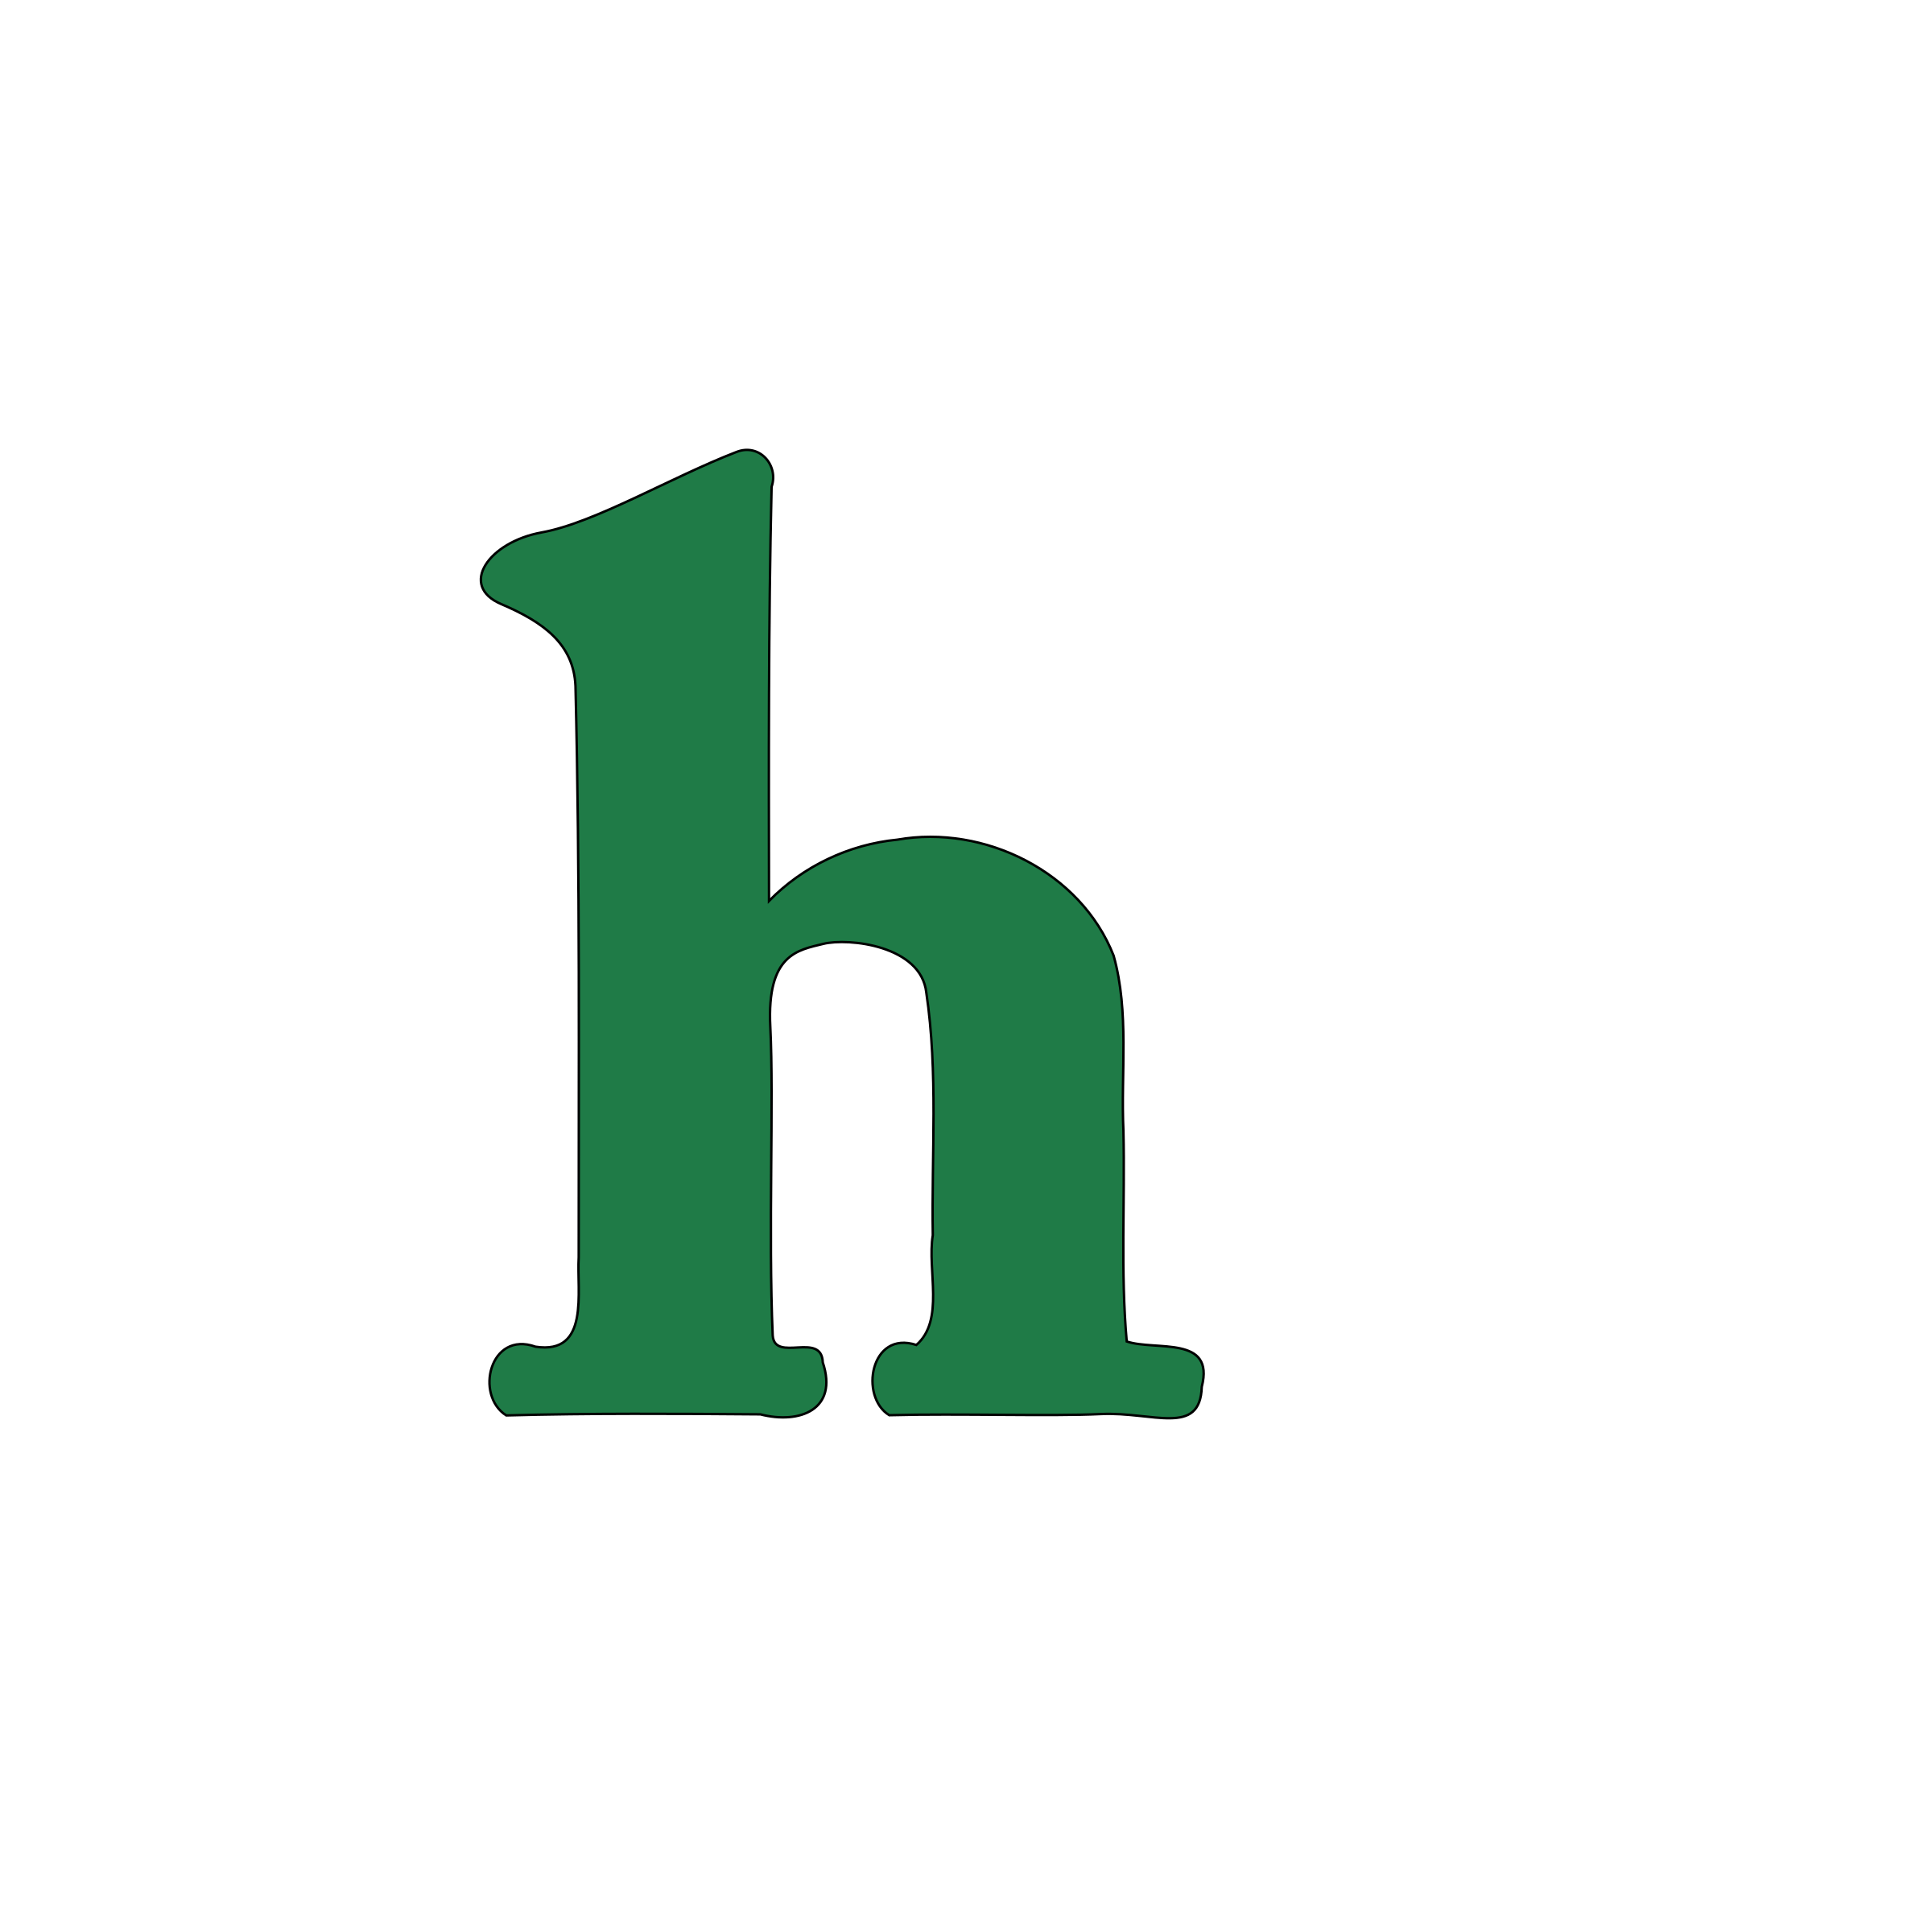 H big image png. E clipart lowercase